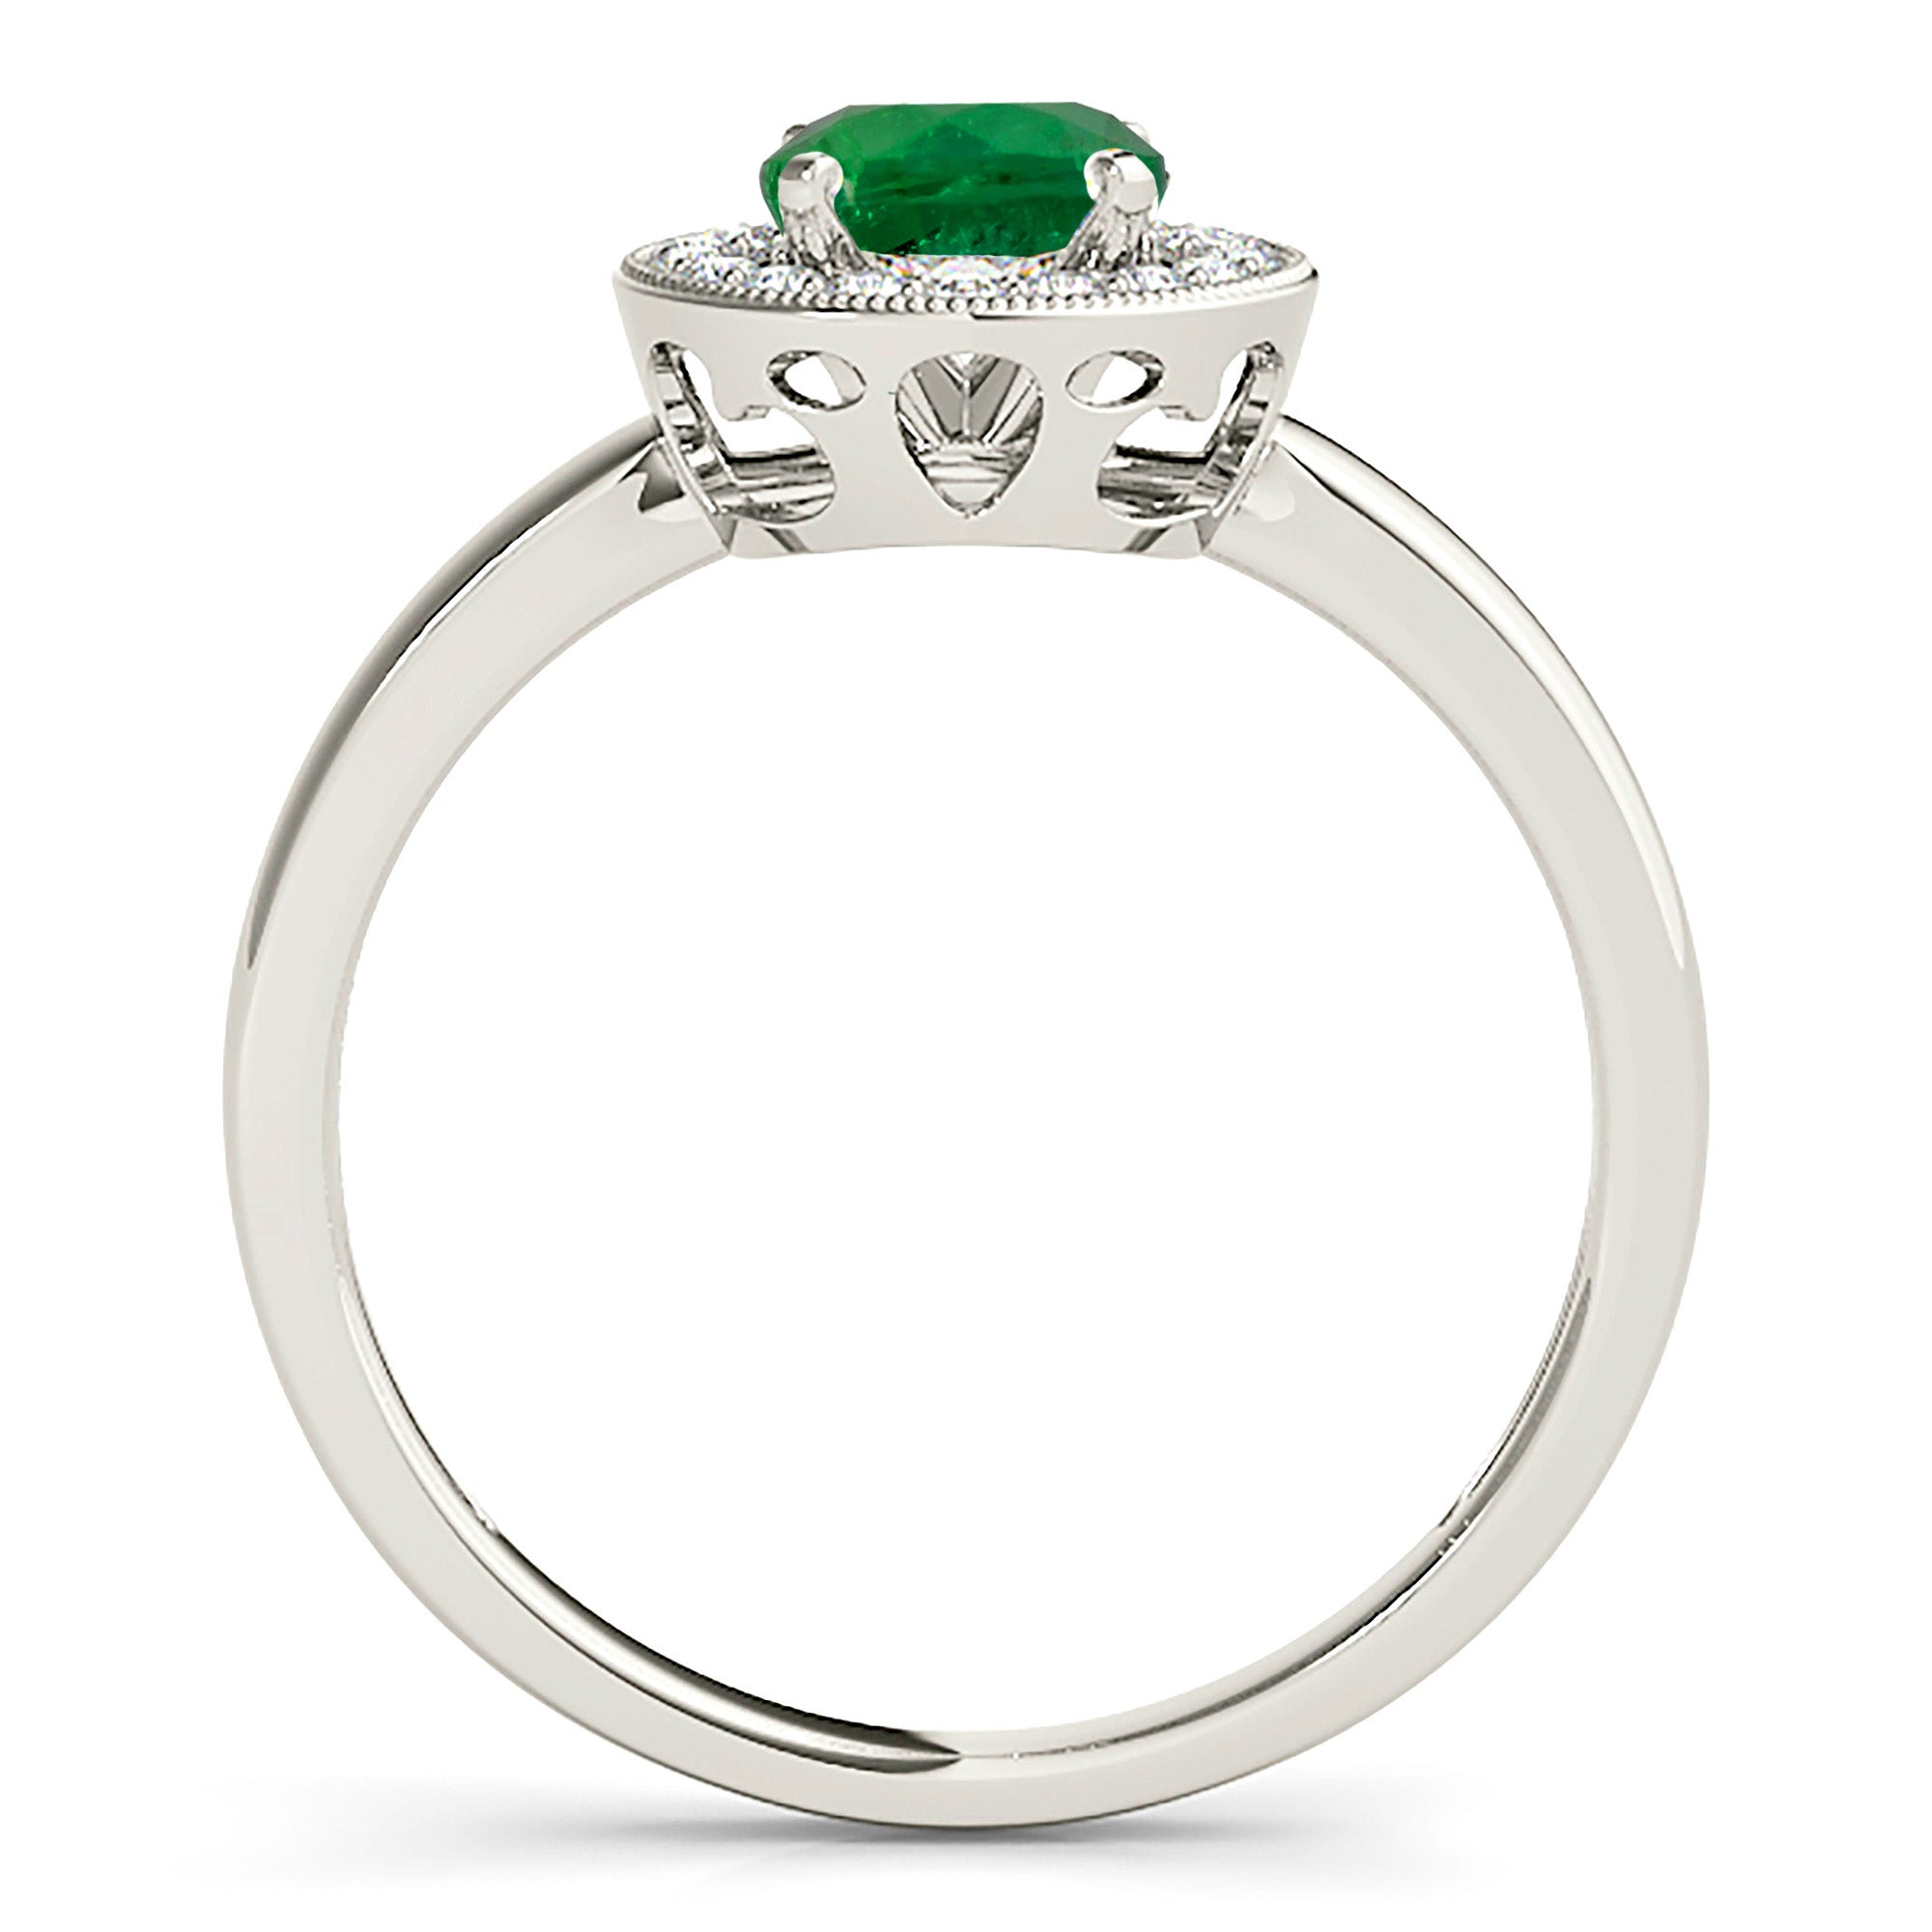 1.14 ct. Genuine Emerald Ring with 0.20 ctw. Diamond Milgrain Halo And Solid Gold Shank-in 14K/18K White, Yellow, Rose Gold and Platinum - Christmas Jewelry Gift -VIRABYANI